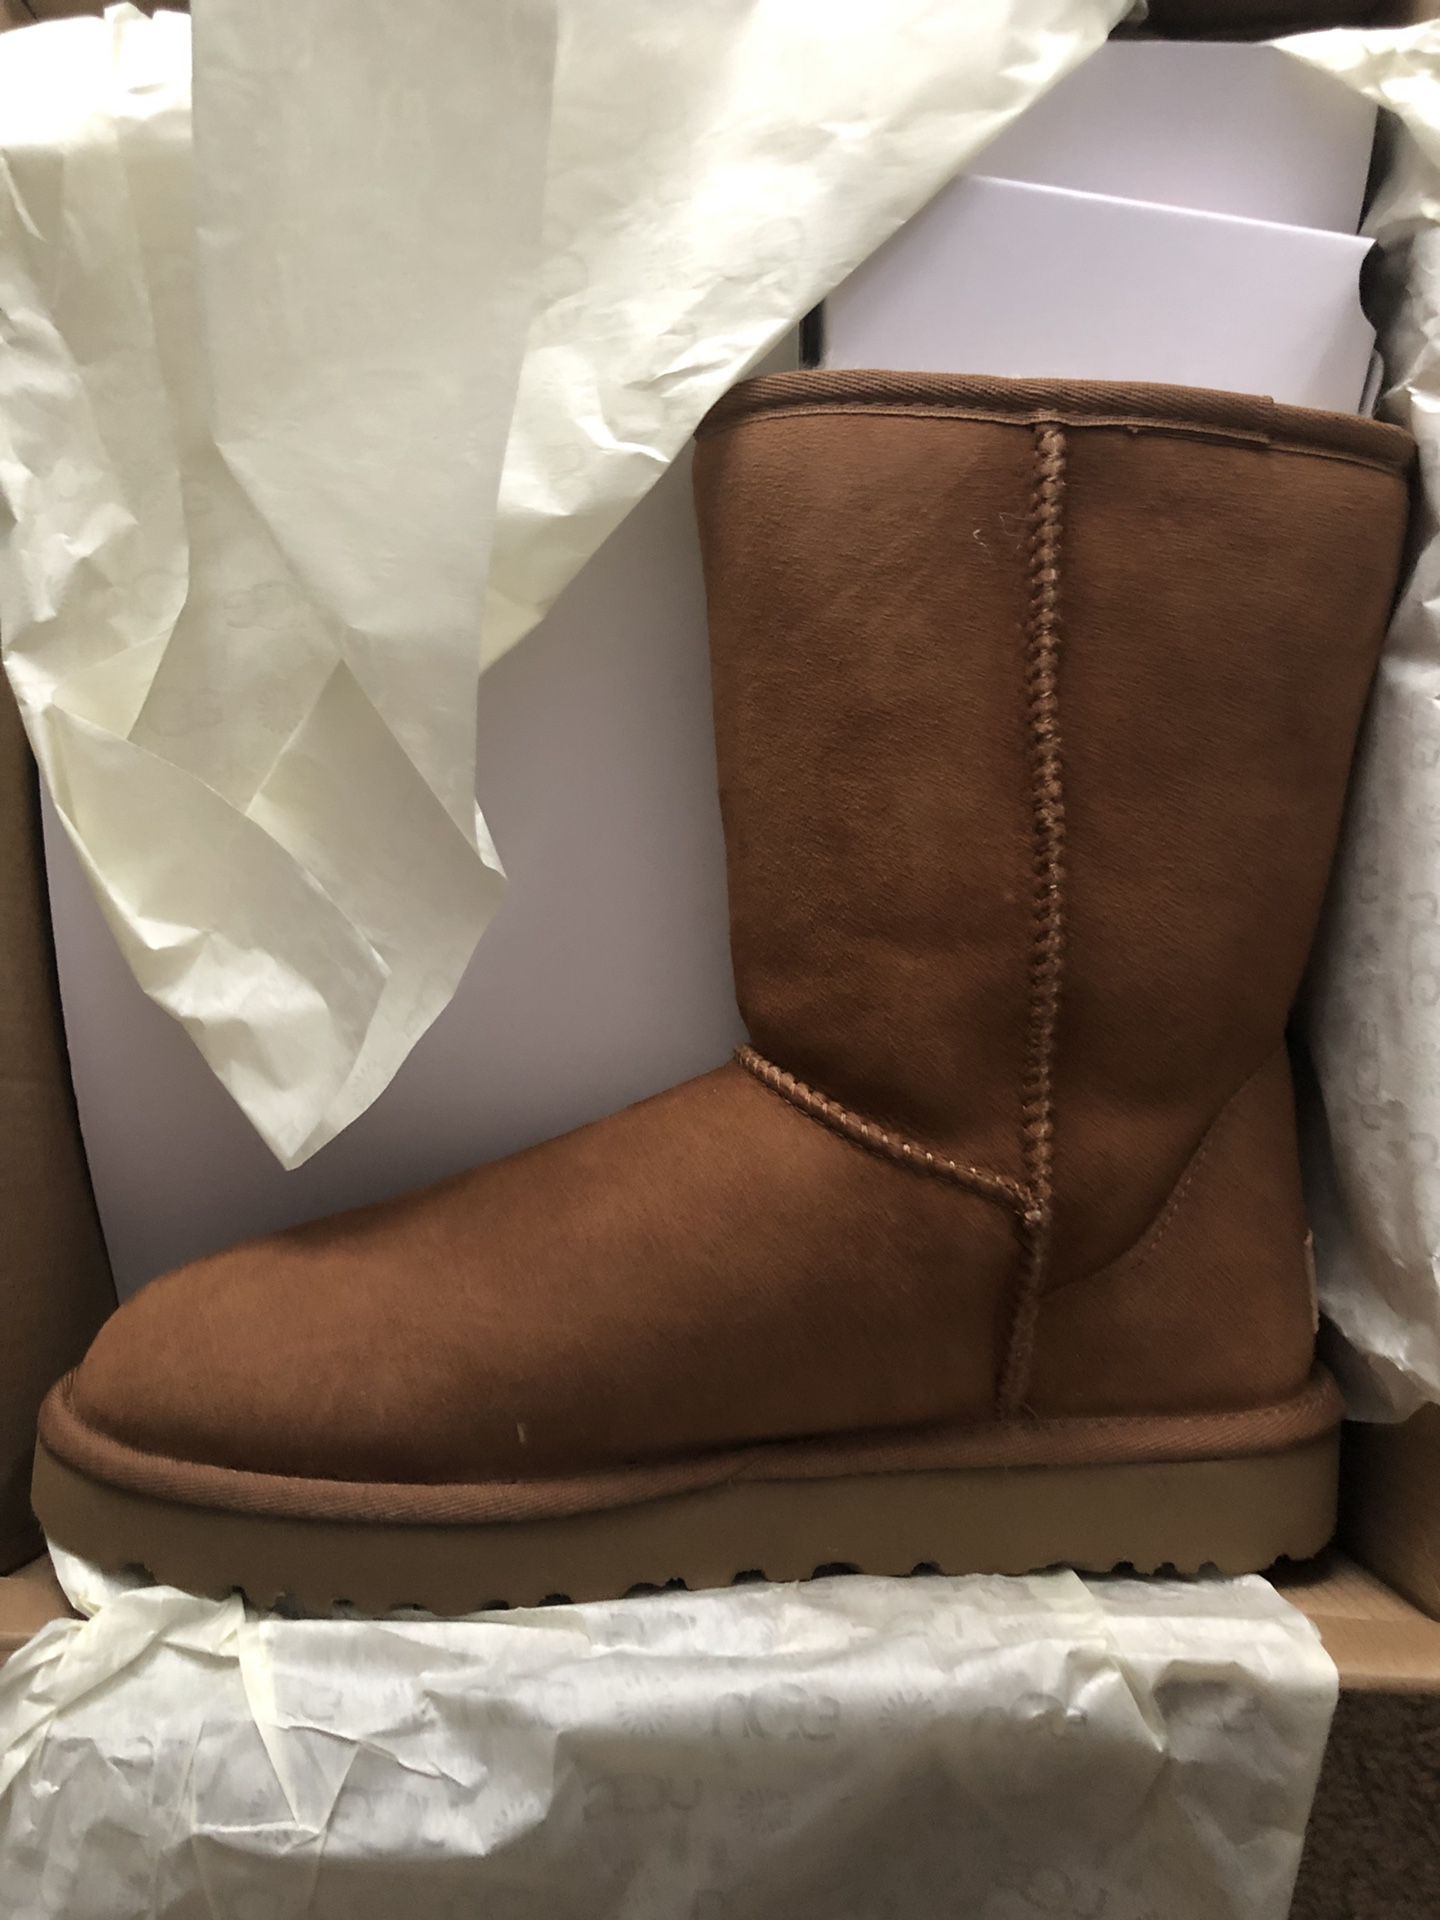 Women’s ugg boots new in box size 7 PRICE FIRM